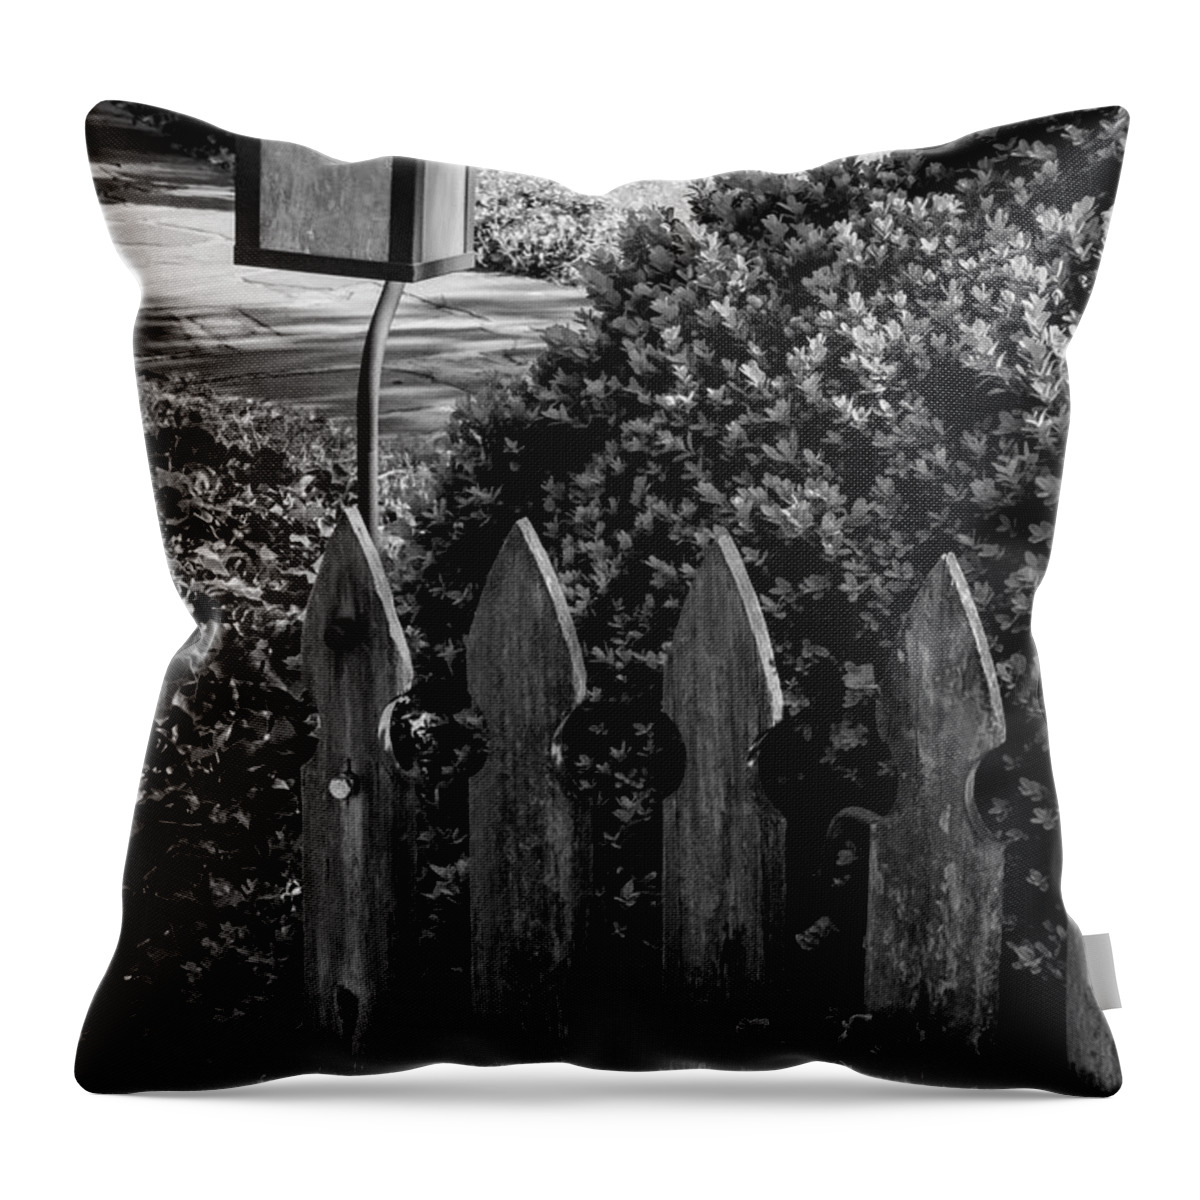 Roanoke Throw Pillow featuring the photograph Lamp and Gate 2 by Bob Phillips